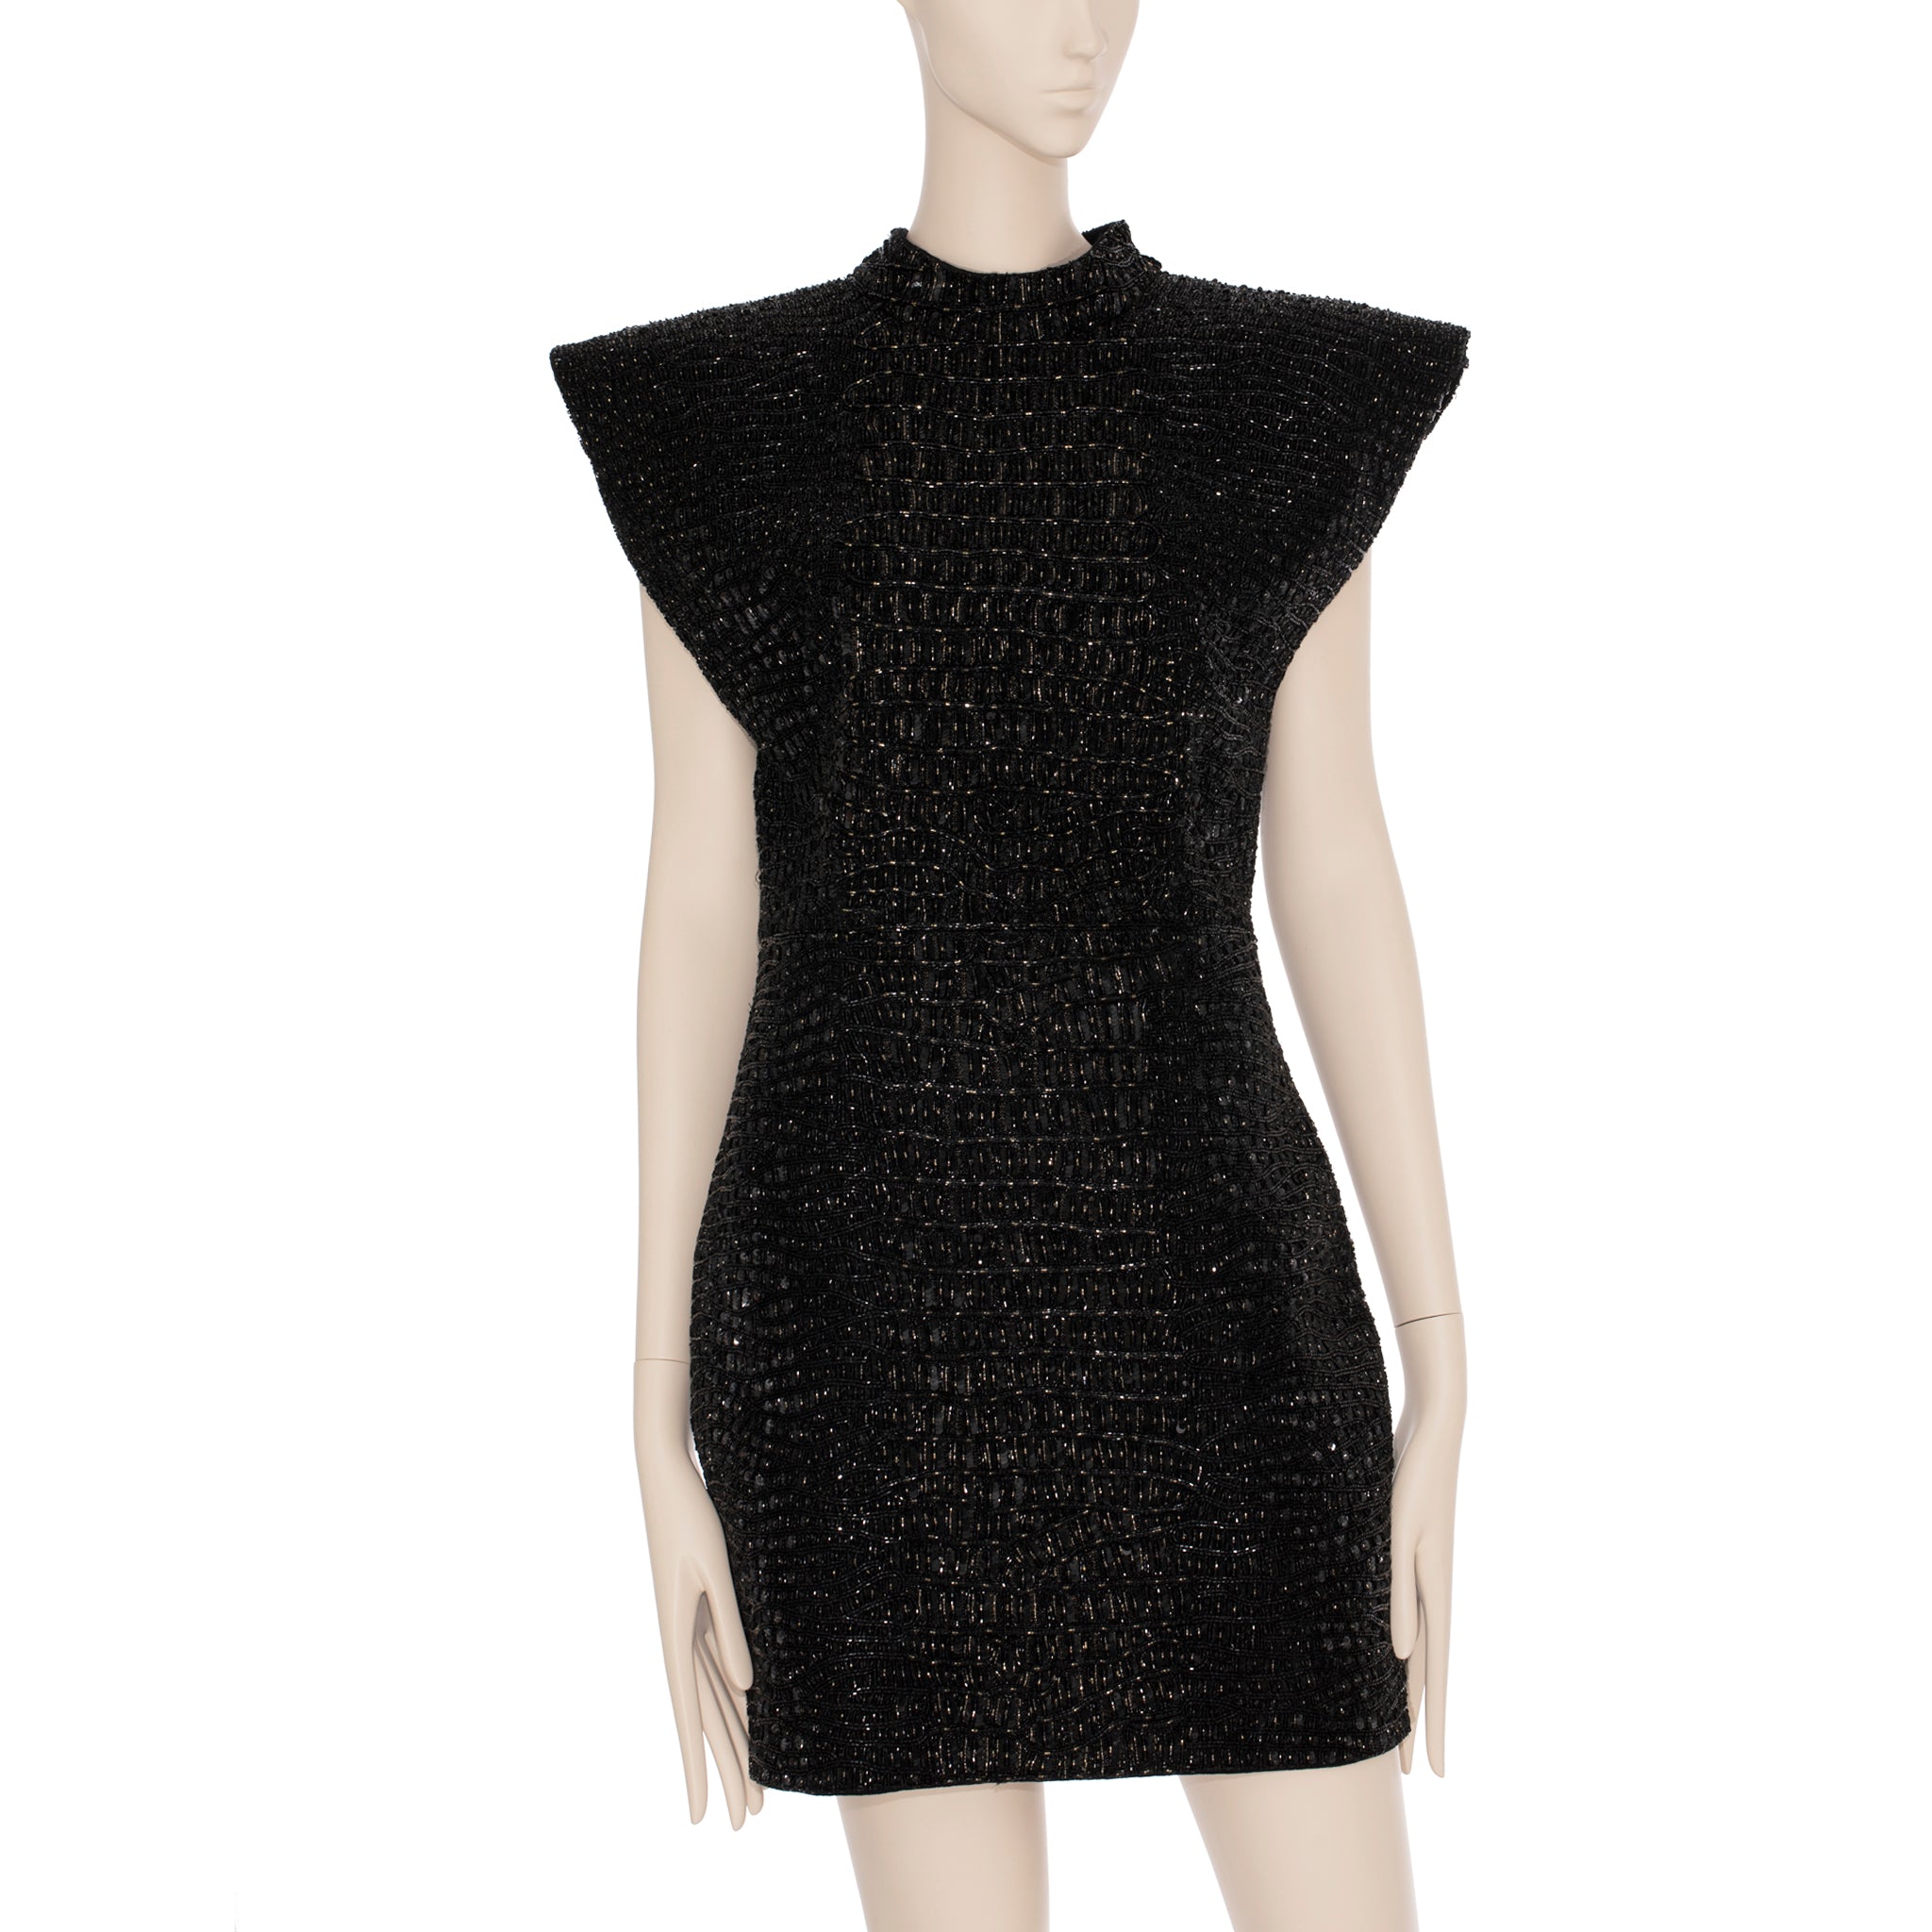 Yves Saint Laurent Couture Black Evening Dress With Crocodile Beading 36 Fr